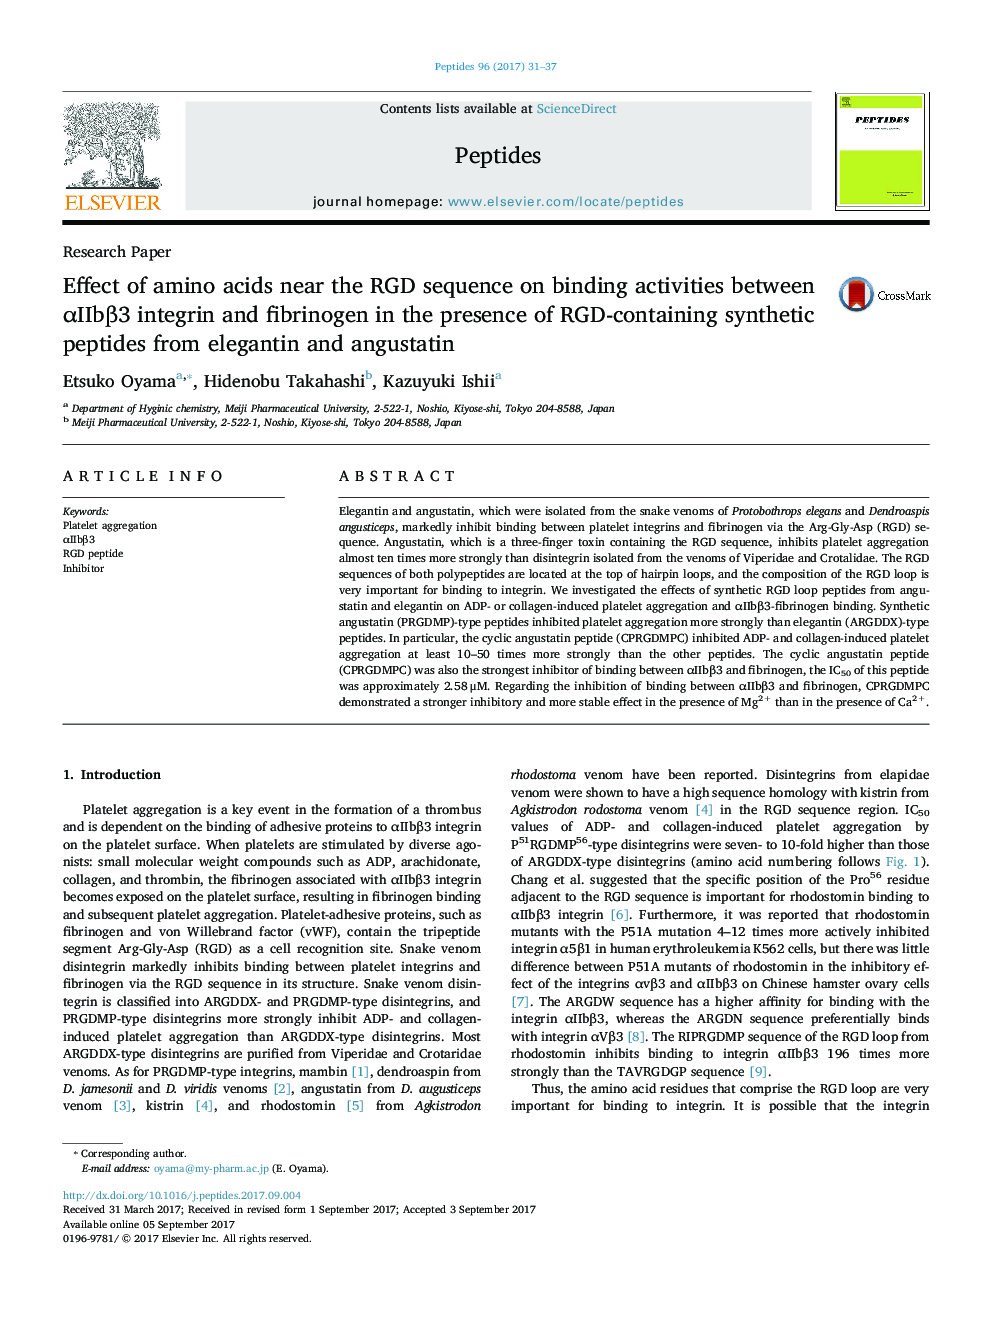 Research PaperEffect of amino acids near the RGD sequence on binding activities between Î±IIbÎ²3 integrin and fibrinogen in the presence of RGD-containing synthetic peptides from elegantin and angustatin